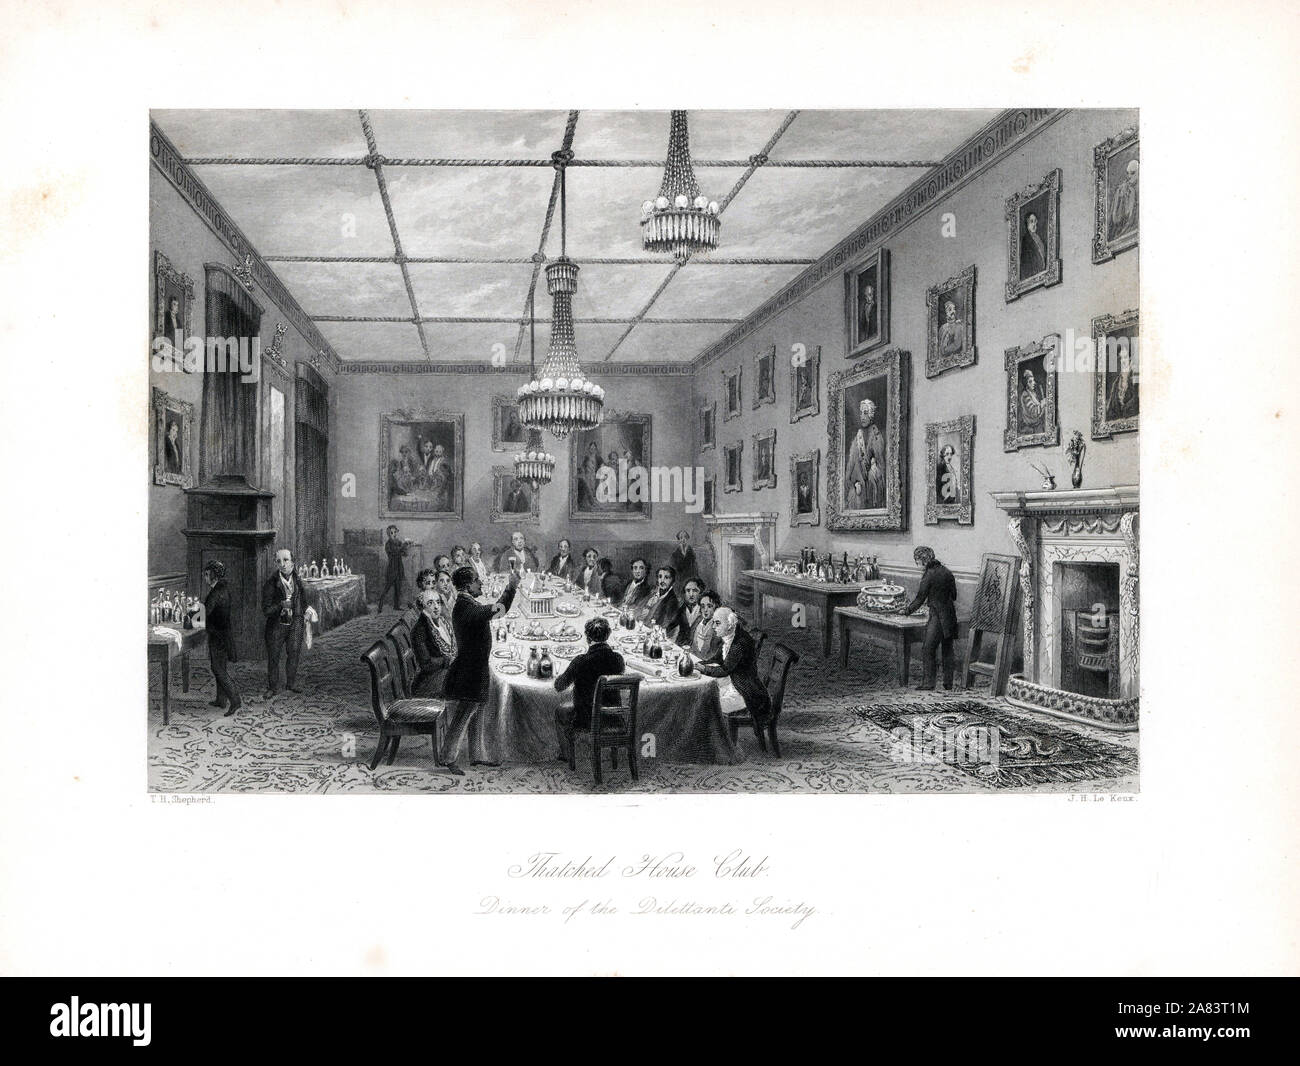 A toast during the Dilettanti Society dinner, Thatched House Tavern, St. James' Street. Members included Sir William Gell, Sir WIlliam Hamilton, Sir Henry Englefield, etc. Steel engraving by J.H. le Keux after an illustration by Thomas Hosmer Shepherd from London Interiors, Their Costumes and Ceremonies, Joshua Mead, London, 1841. Stock Photo